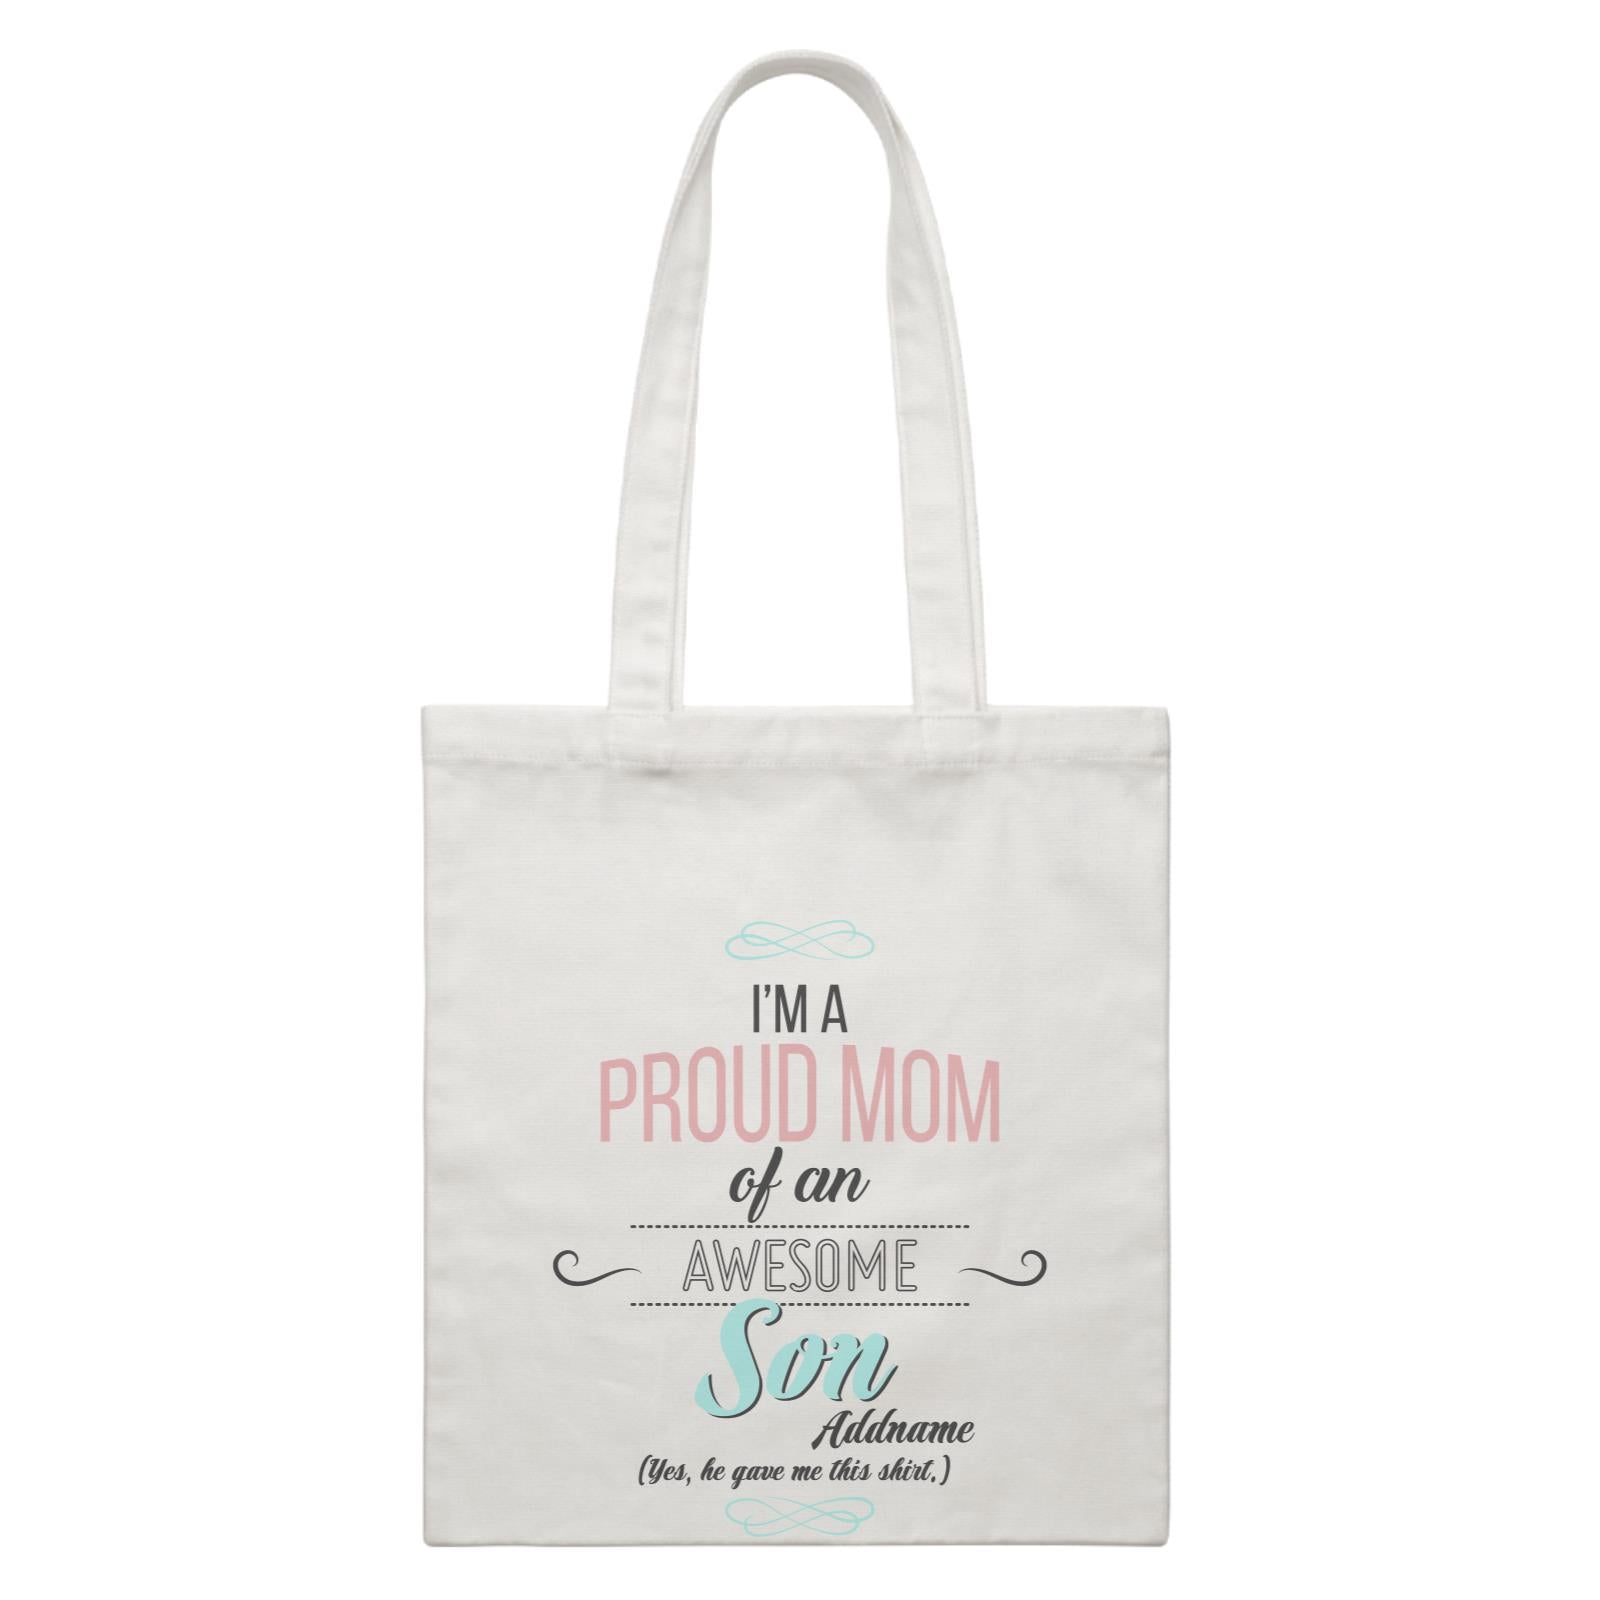 I'm A Proud Mom Of An Awesome Son Personalizable with Name White Canvas Bag